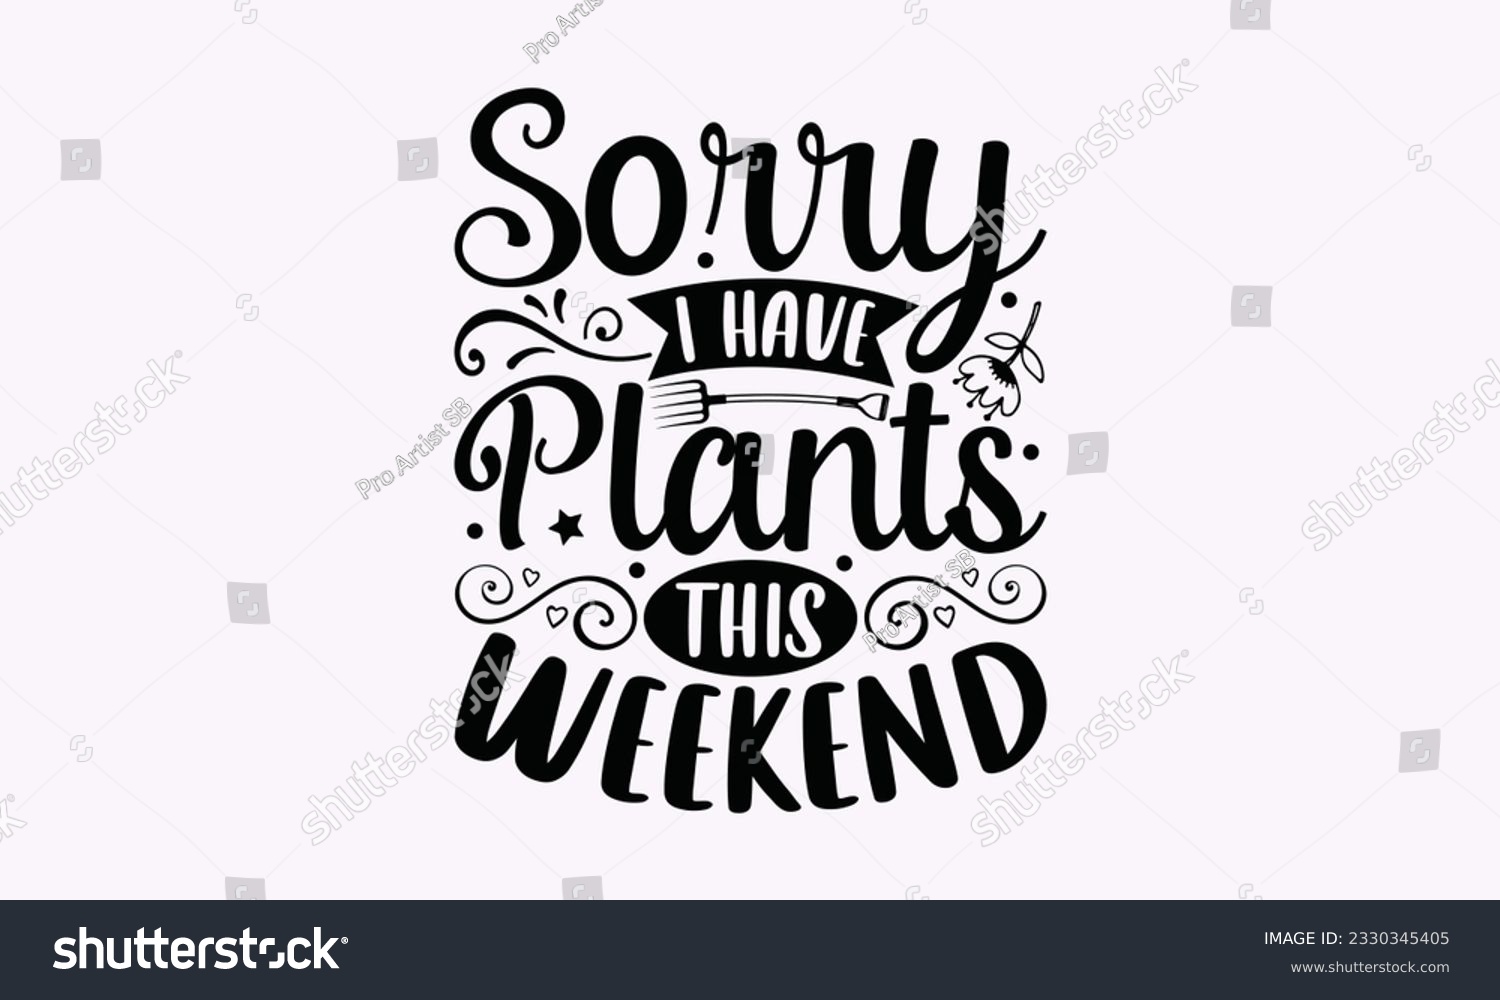 SVG of Sorry I have plants this weekend - Gardening SVG Design, plant Quotes, Hand drawn lettering phrase, Isolated on white background. svg